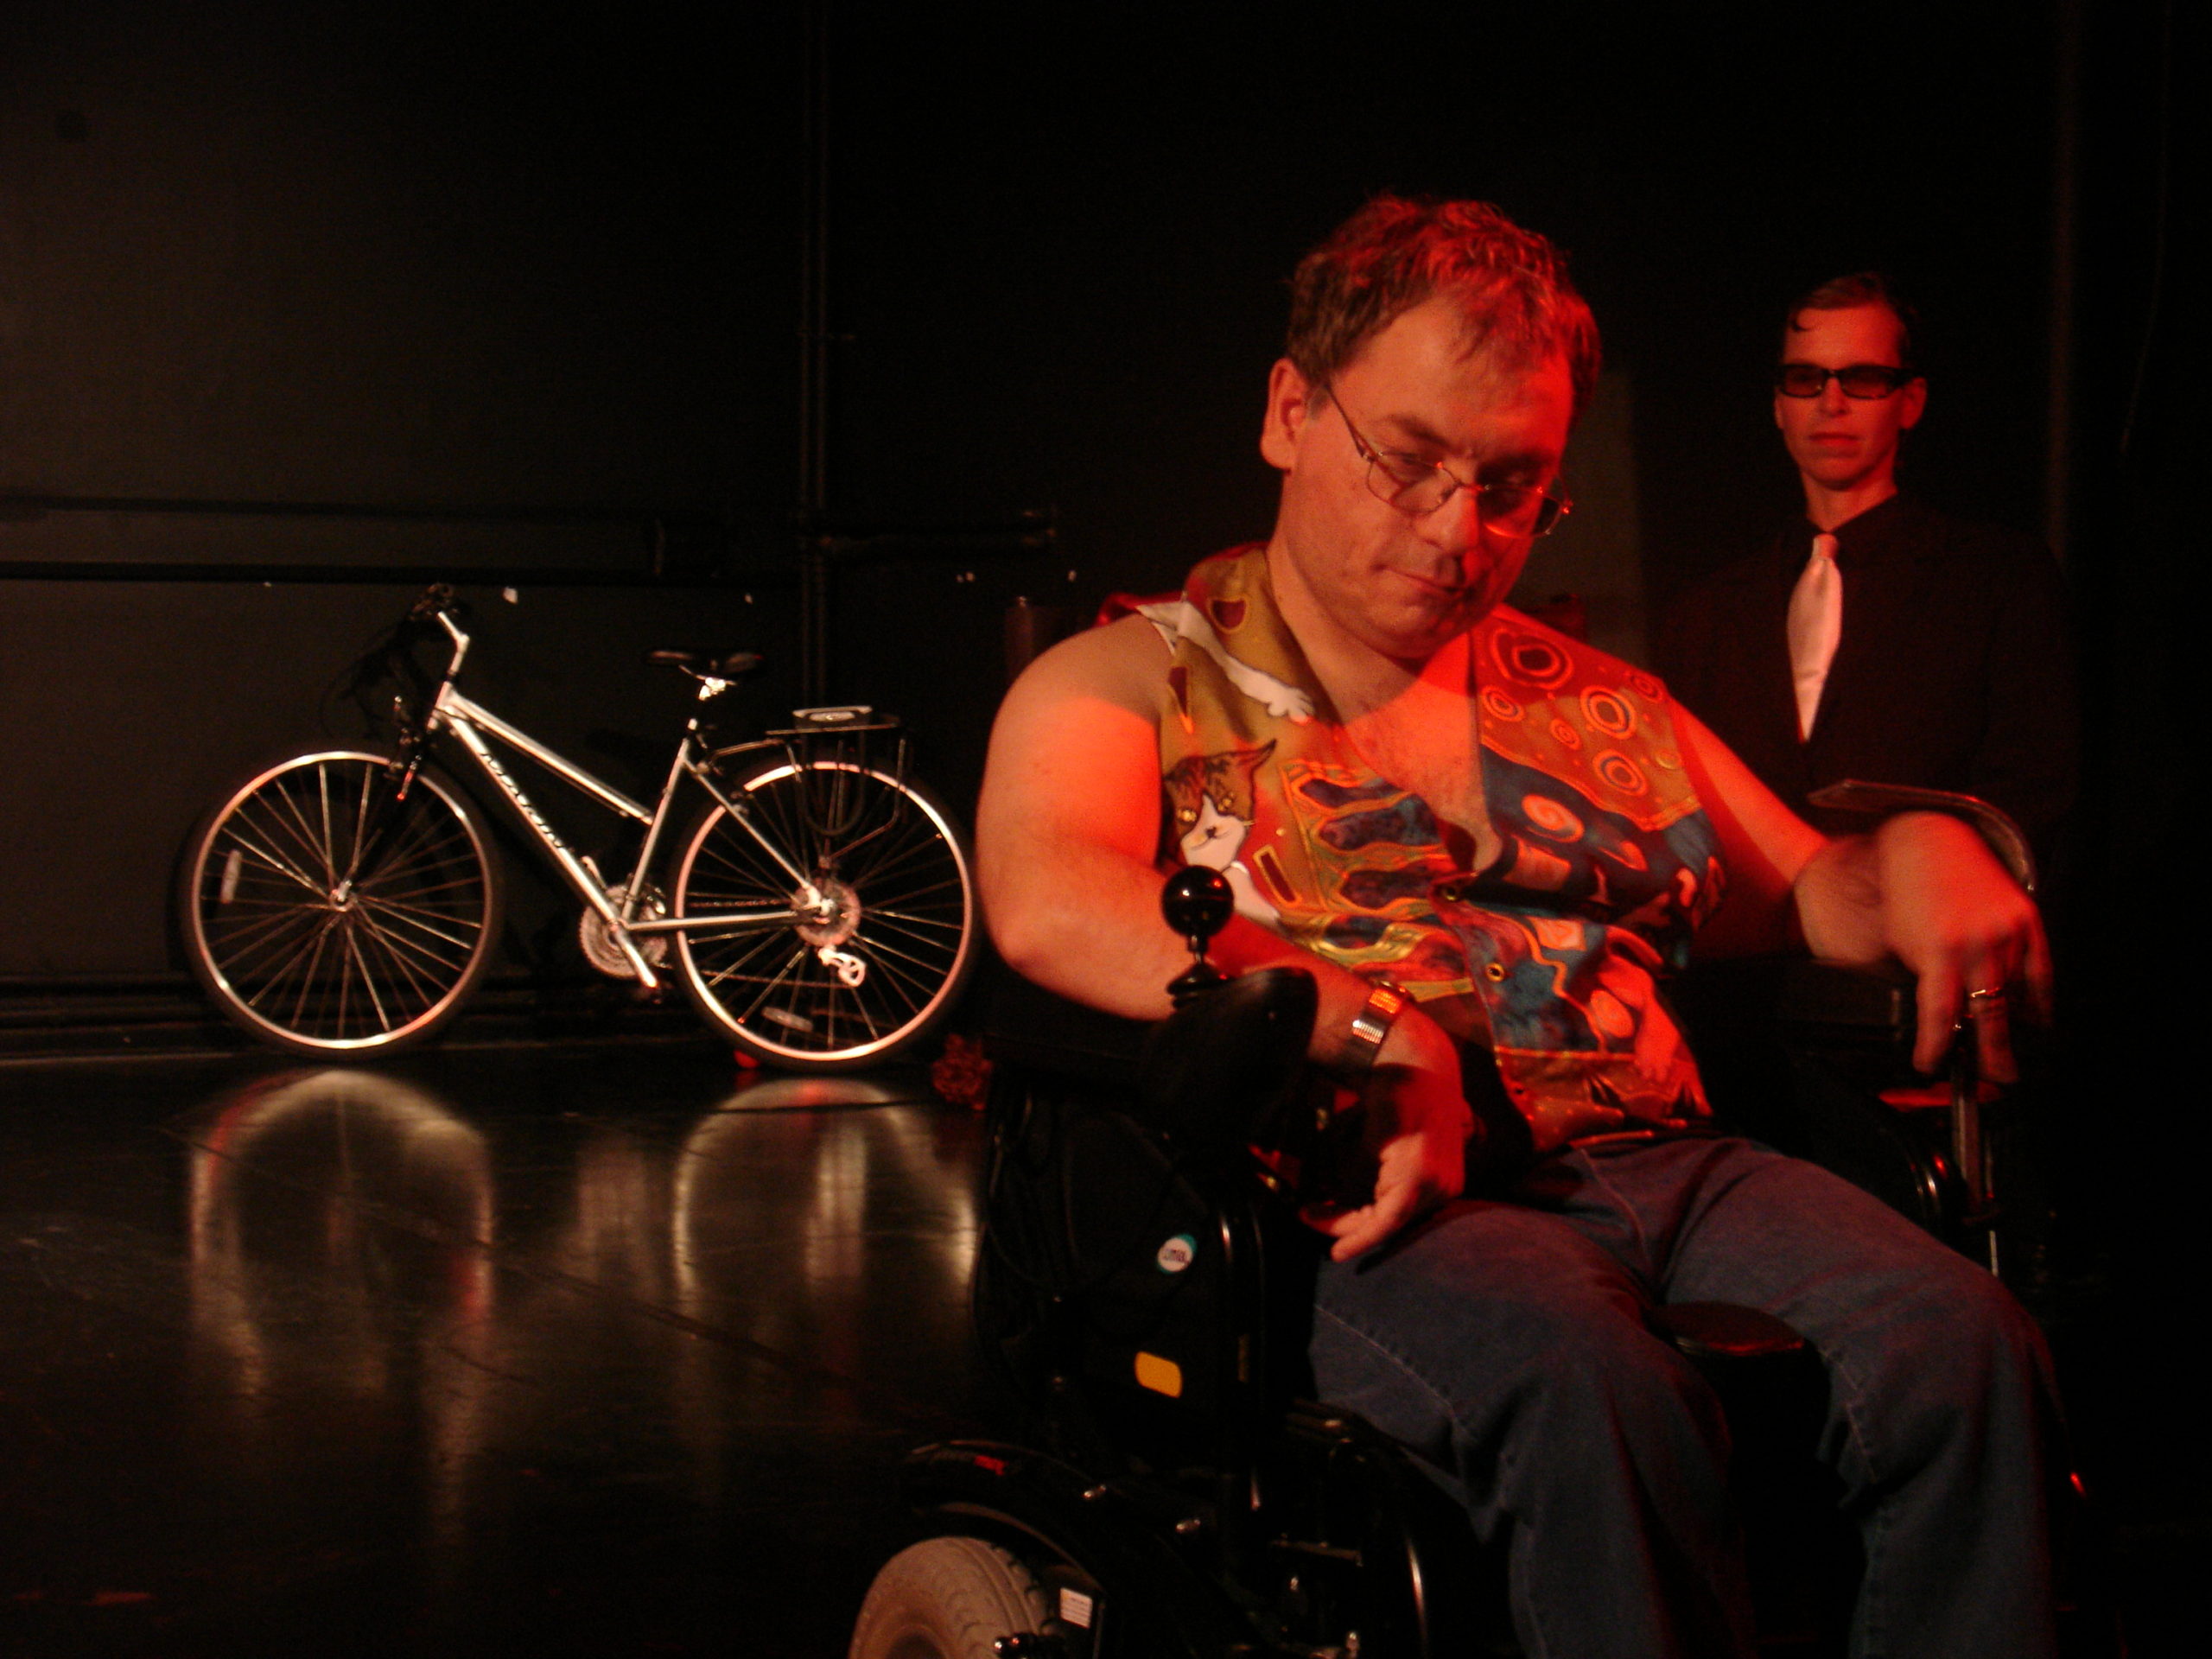 A man in a wheelchair is front and centre stage, he is being watched by a man behind him in sunglasses. There is a bike on the stage behind them.